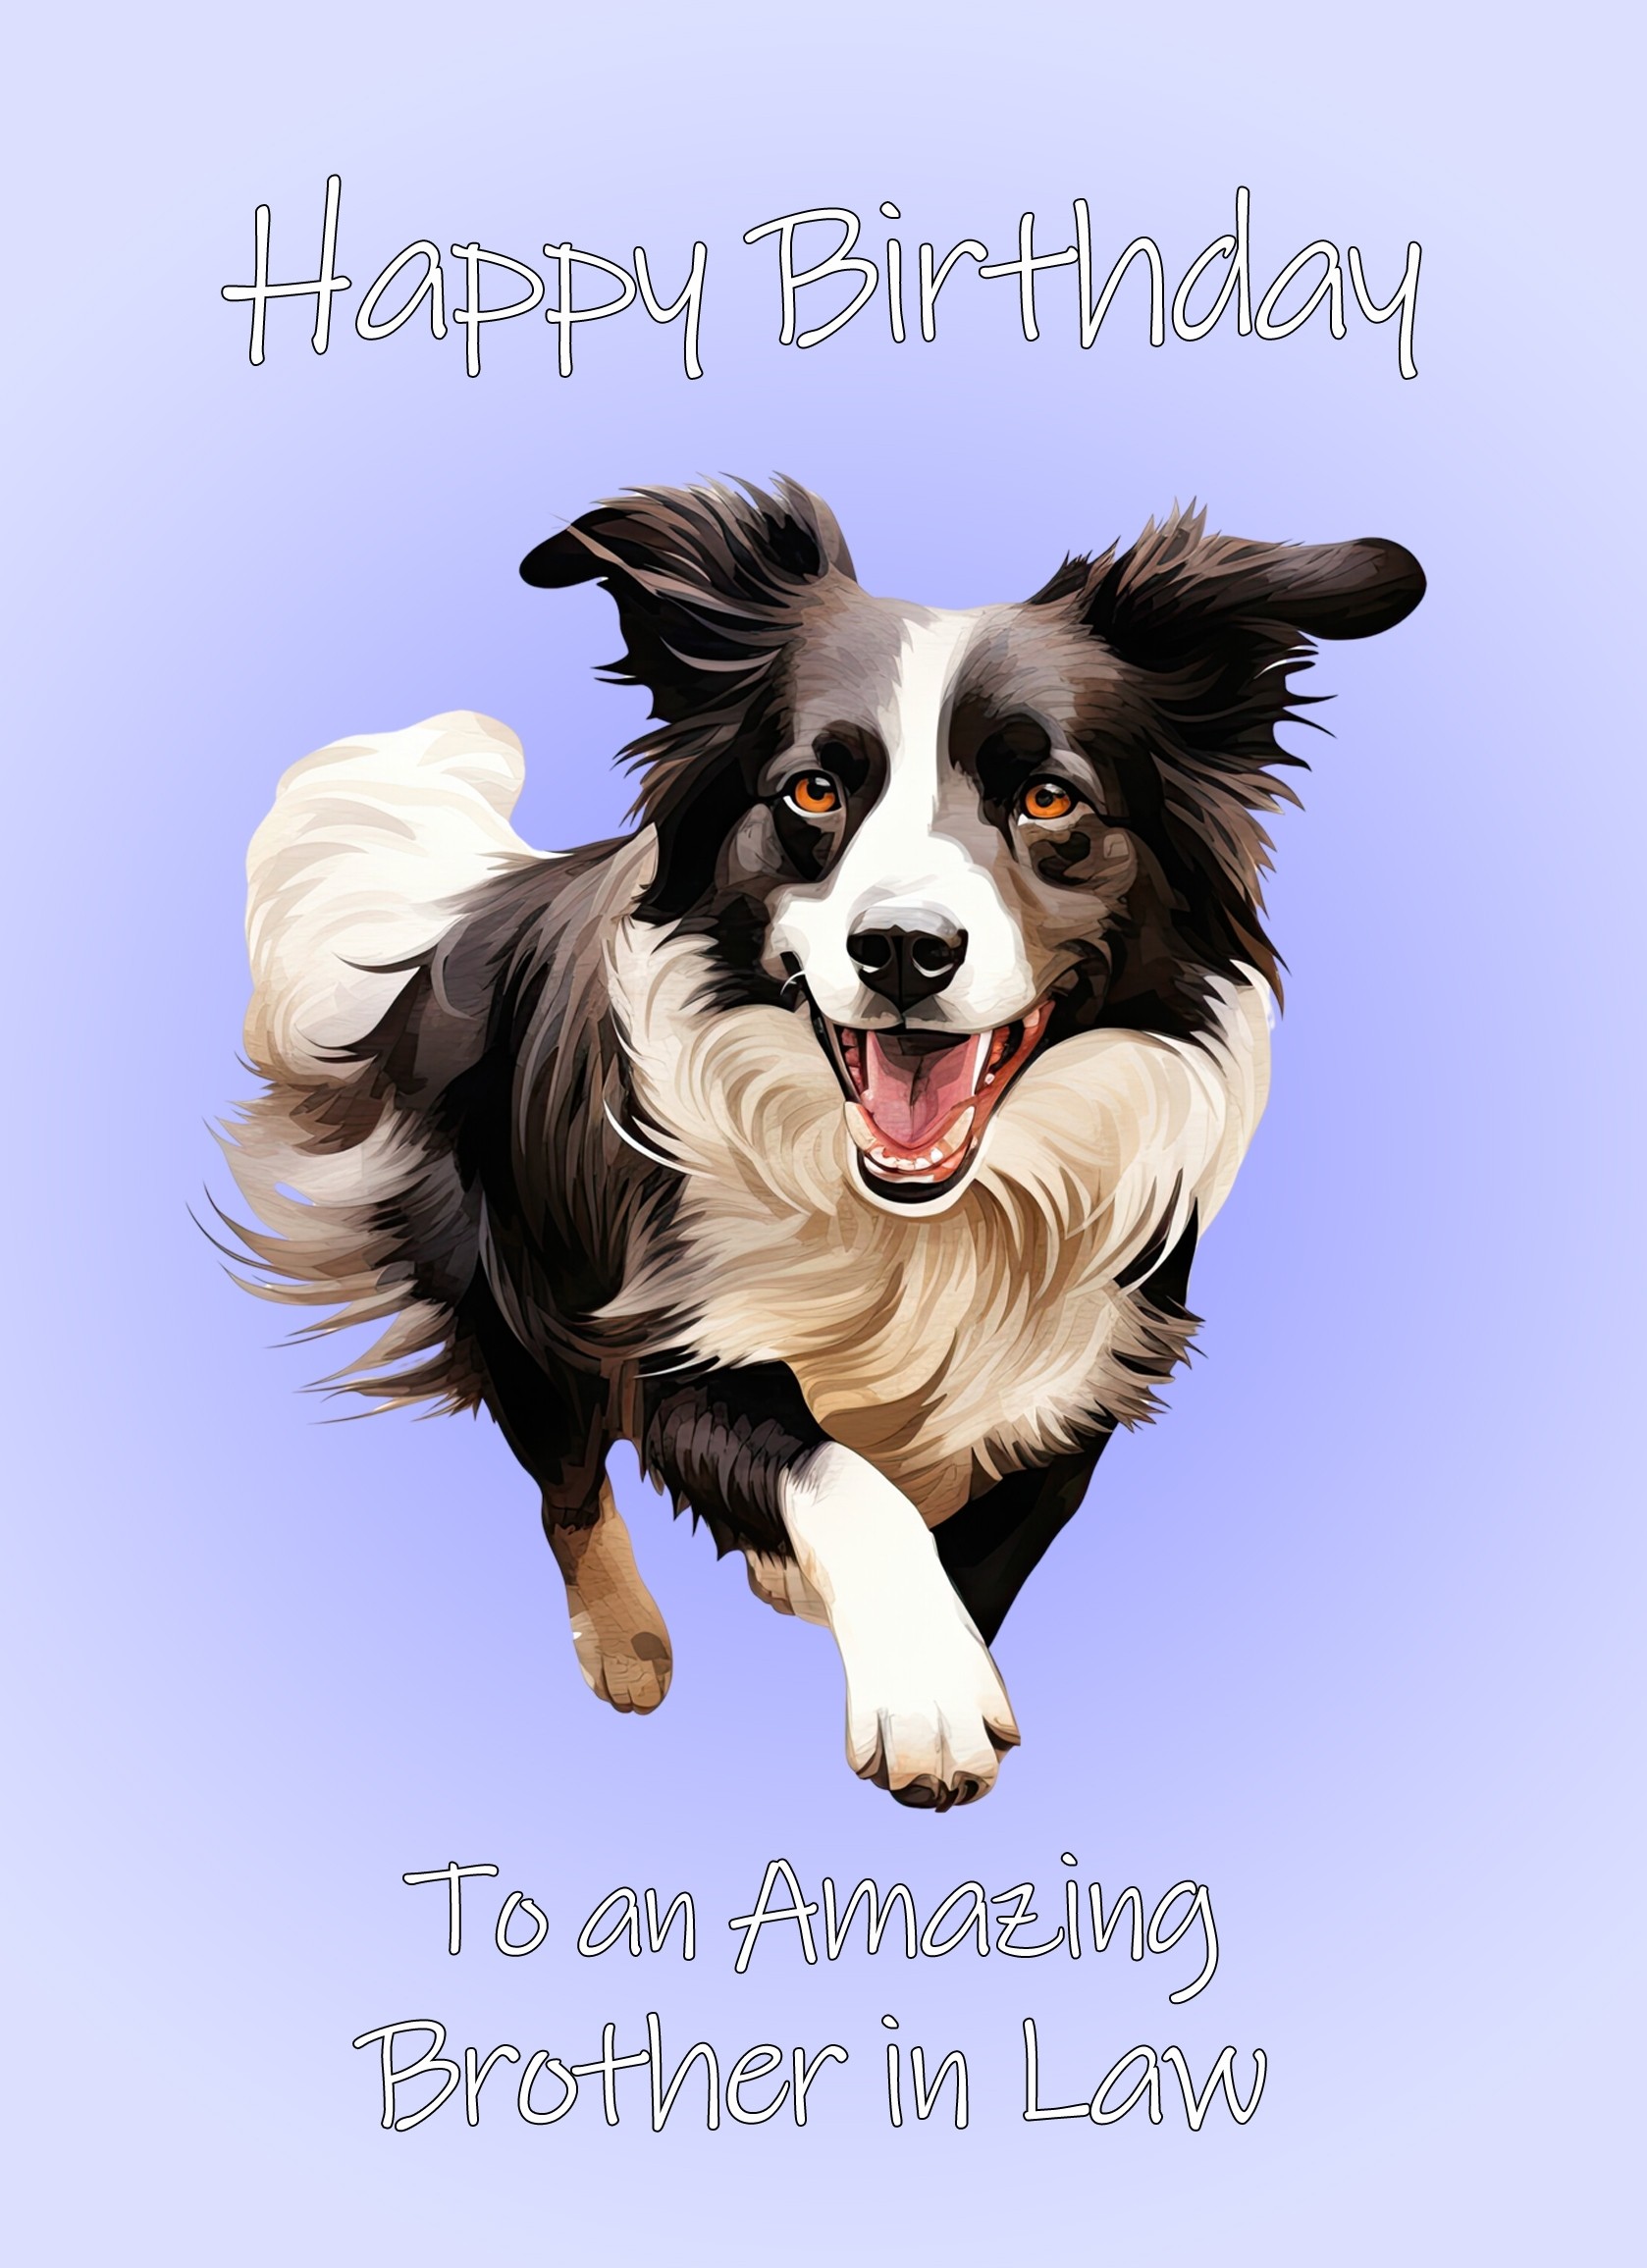 Border Collie Dog Birthday Card For Brother in Law